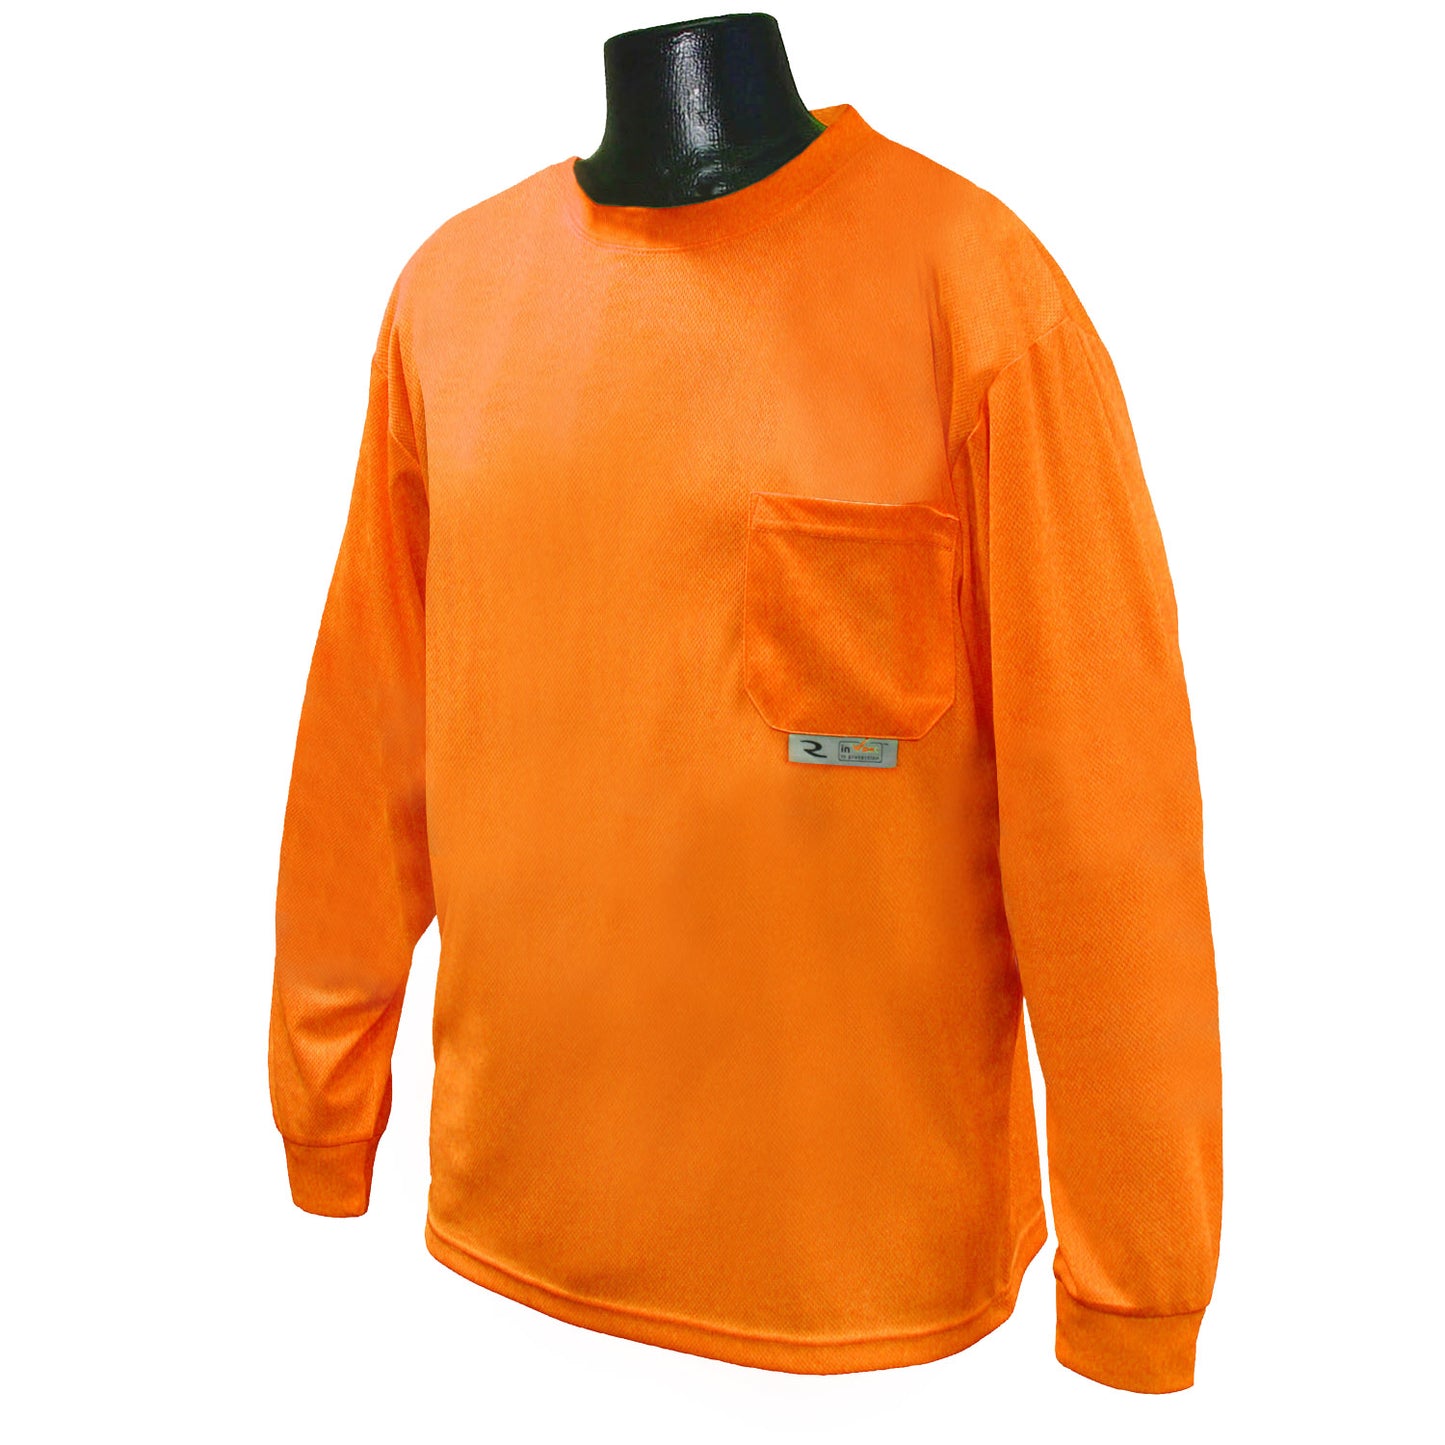 Radians ST21-N Non-Rated Long Sleeve T-shirt with Max-Dri